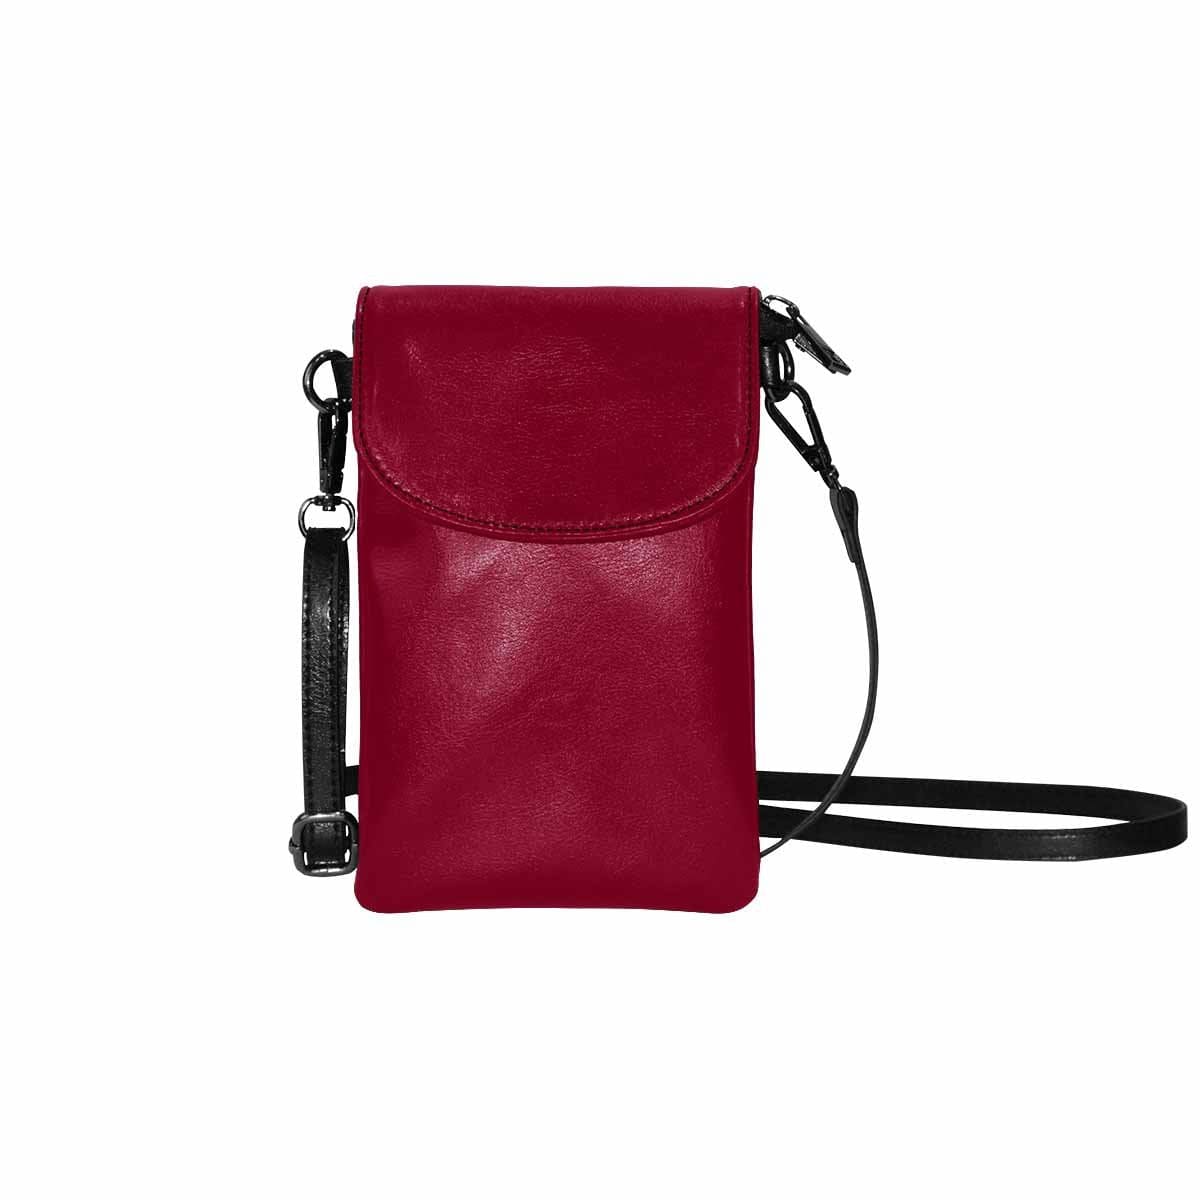 Womens Cell Phone Purse, Burgundy Red - CLASSY CLOSET BOUTIQUEWomens Cell Phone Purse, Burgundy RedBags | Wallets | Phone CasesDG852737DXH5757DOne Size